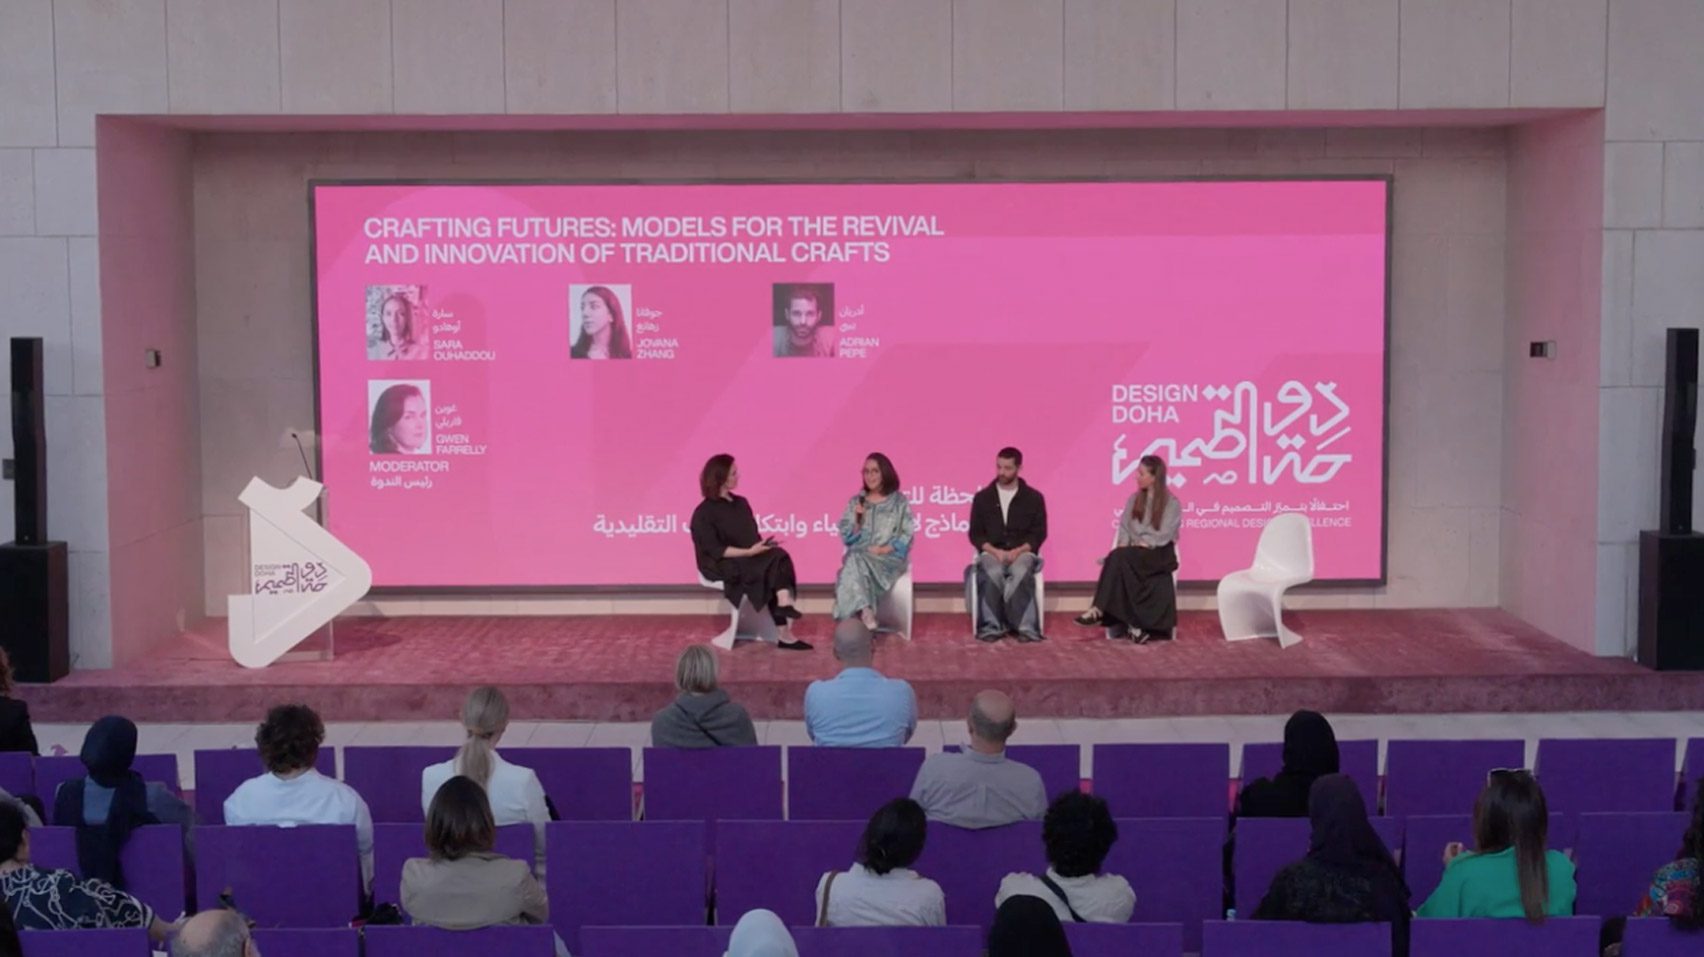 Video frame of speakers on stage at the Crafting Futures panel at Design Doha, viewed from the back of the auditorium